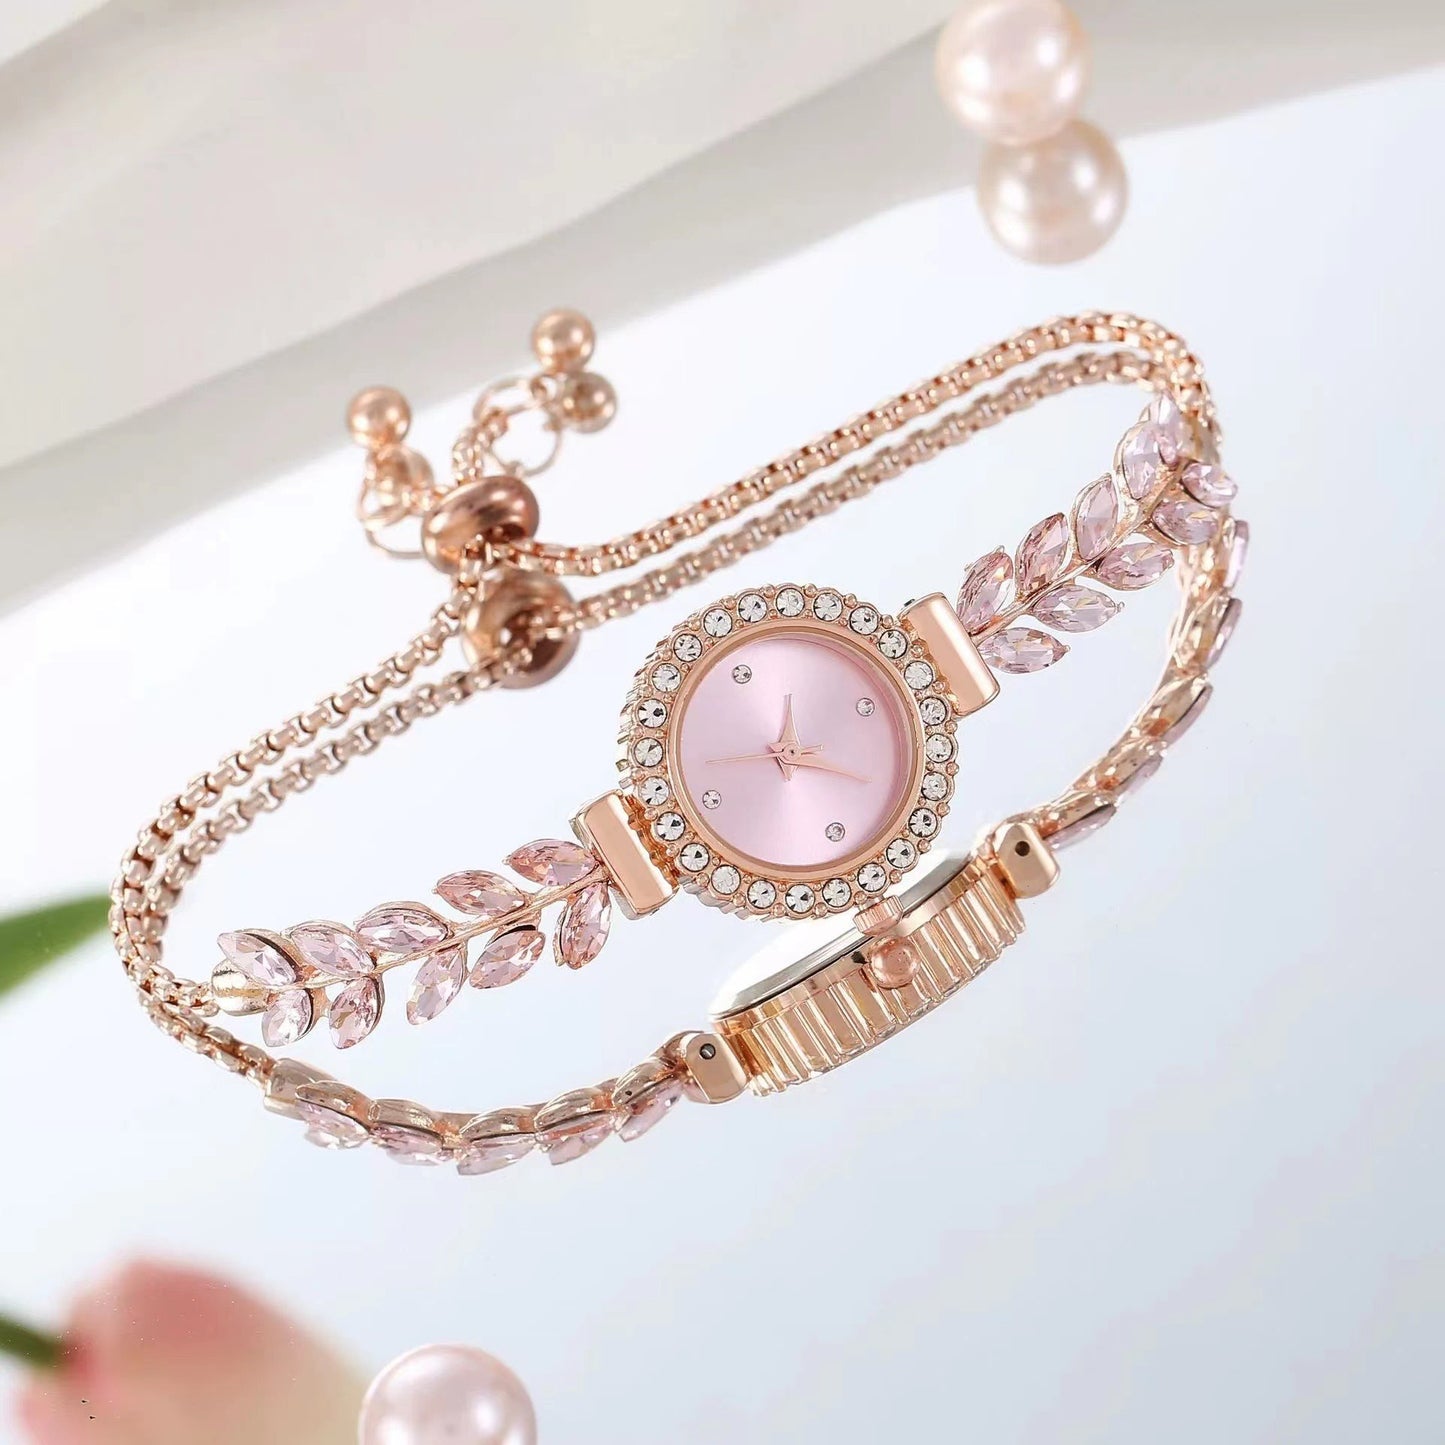 New Fashion Leaf Pulling Rope Women's Bracelet Watch with Diamonds, Small and Comfortable Temperament, Free Adjustment Women's Quartz Watch